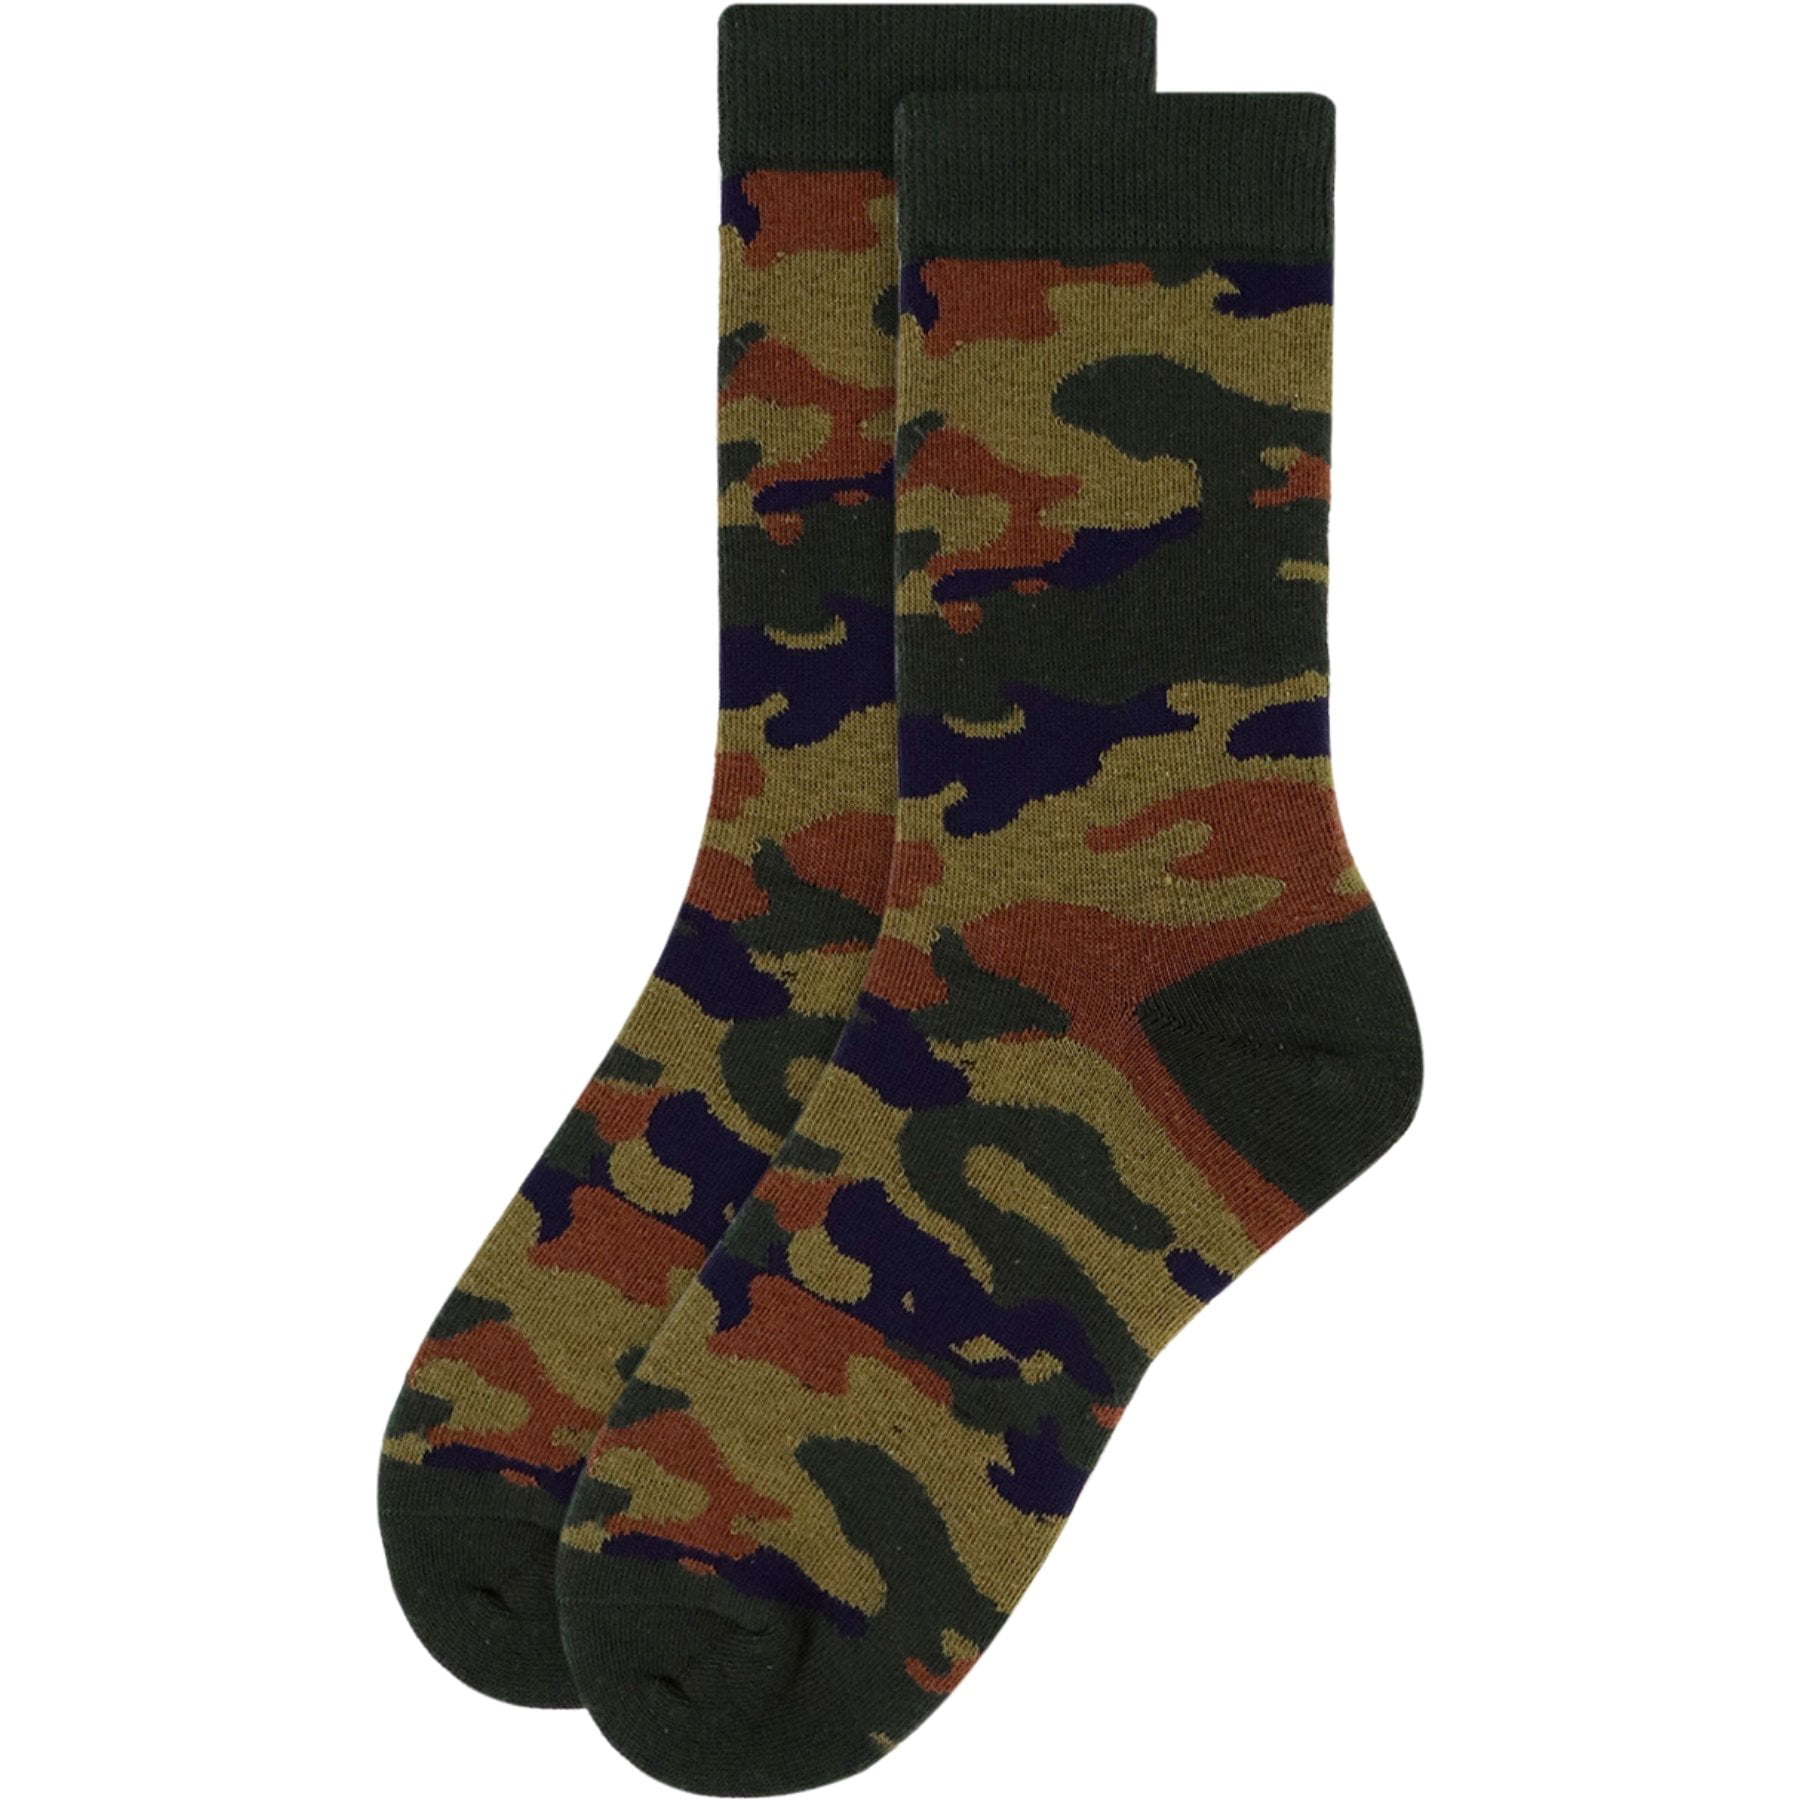 5 Pairs Lot For Men New Low Cut Ankle Sports Socks Camouflage Fashion Camo Style 